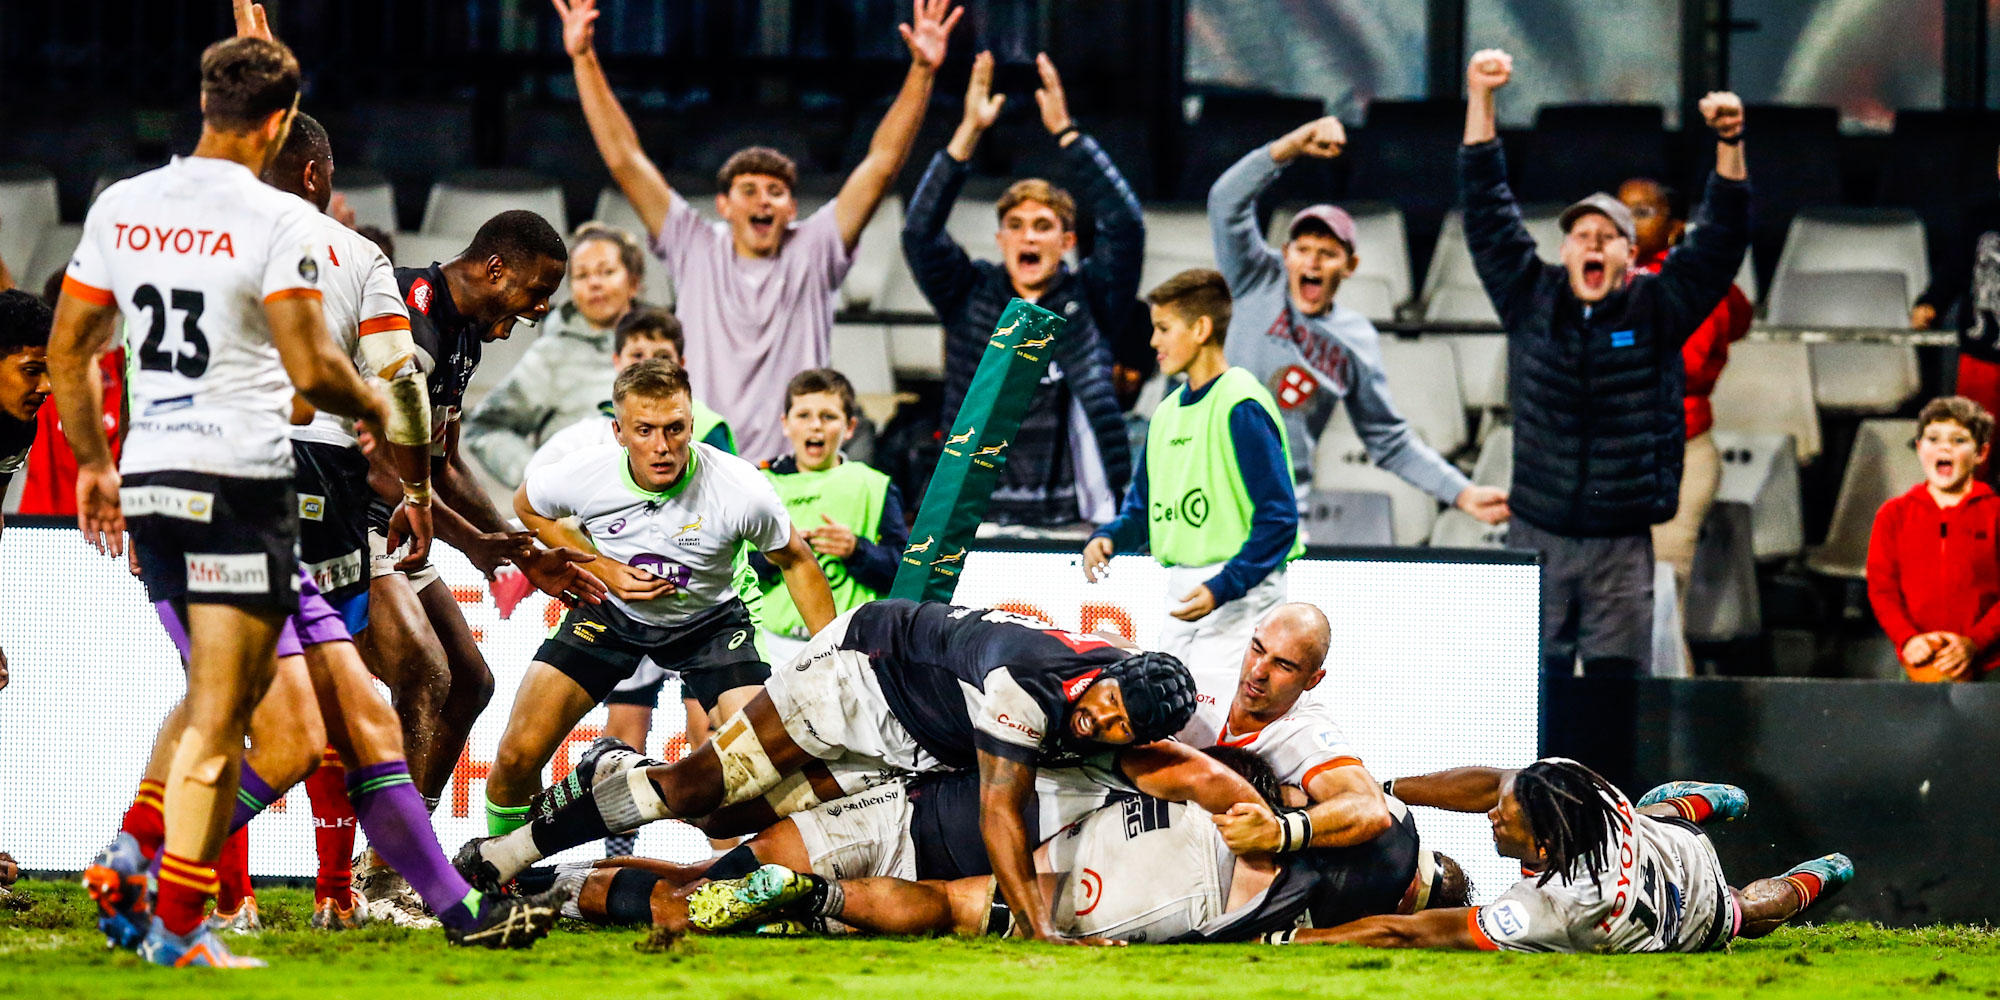 The Cell C Sharks gave their supporters a lot to cheer about on Friday night.